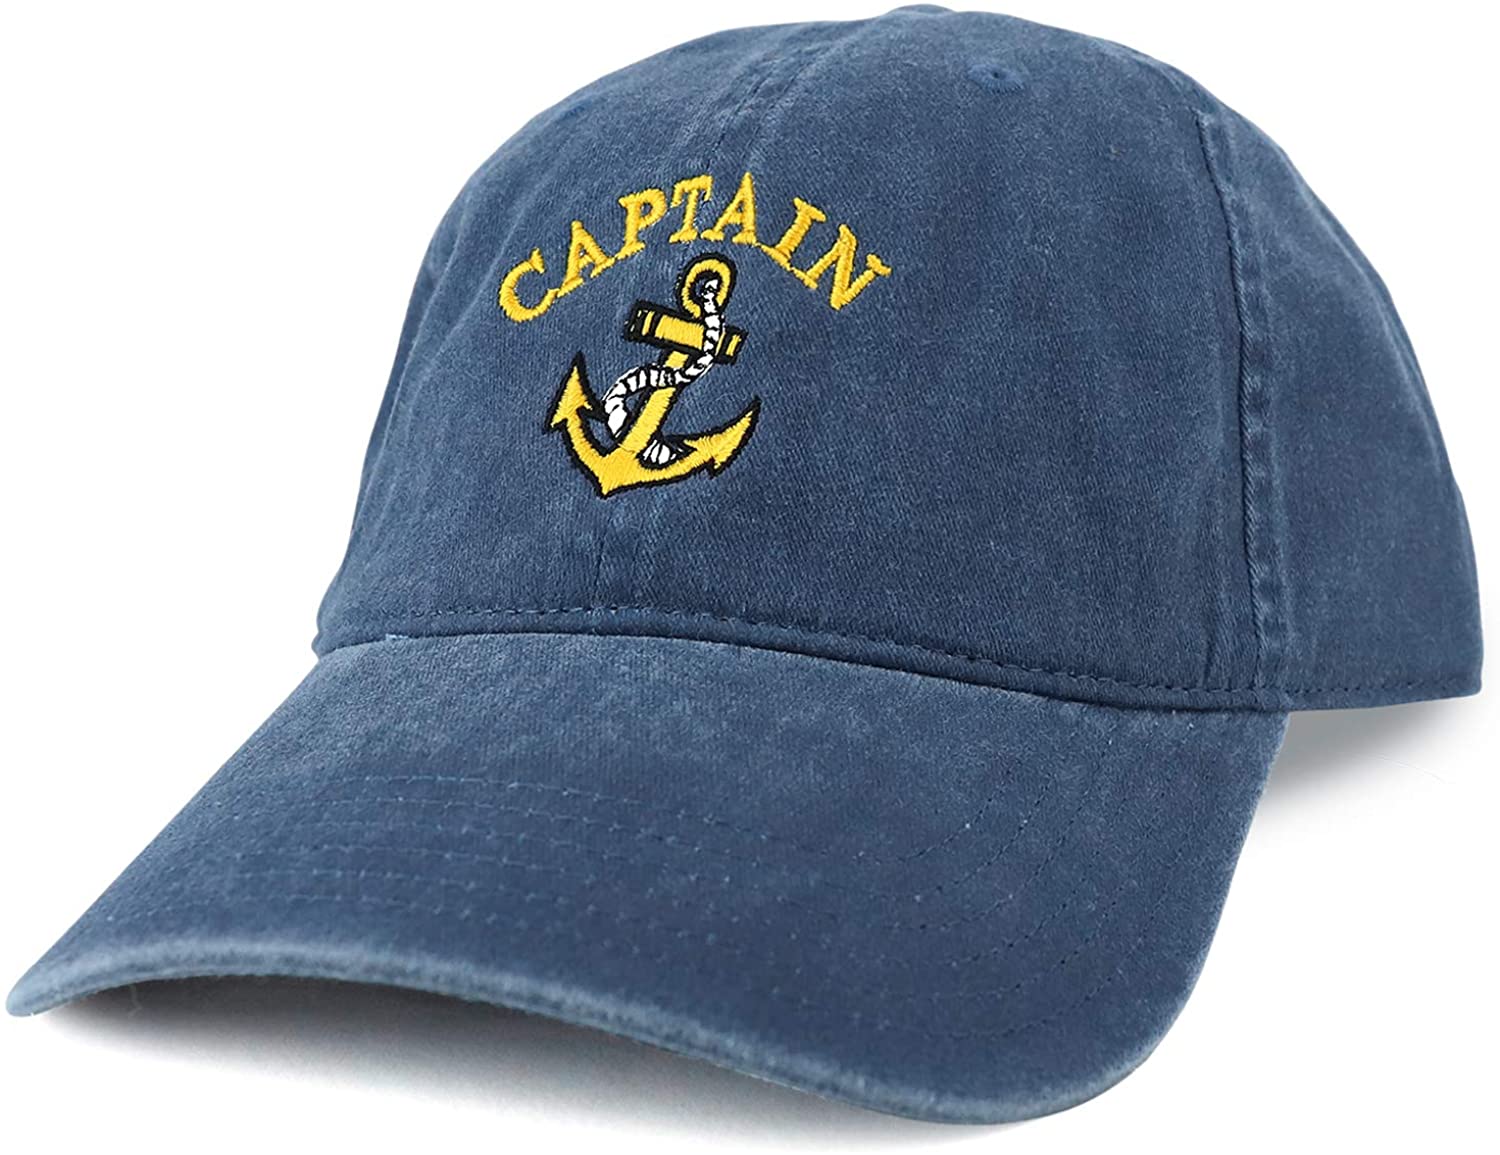 Captain Anchor Logo Embroidered Pigment Dyed 100% Cotton Cap